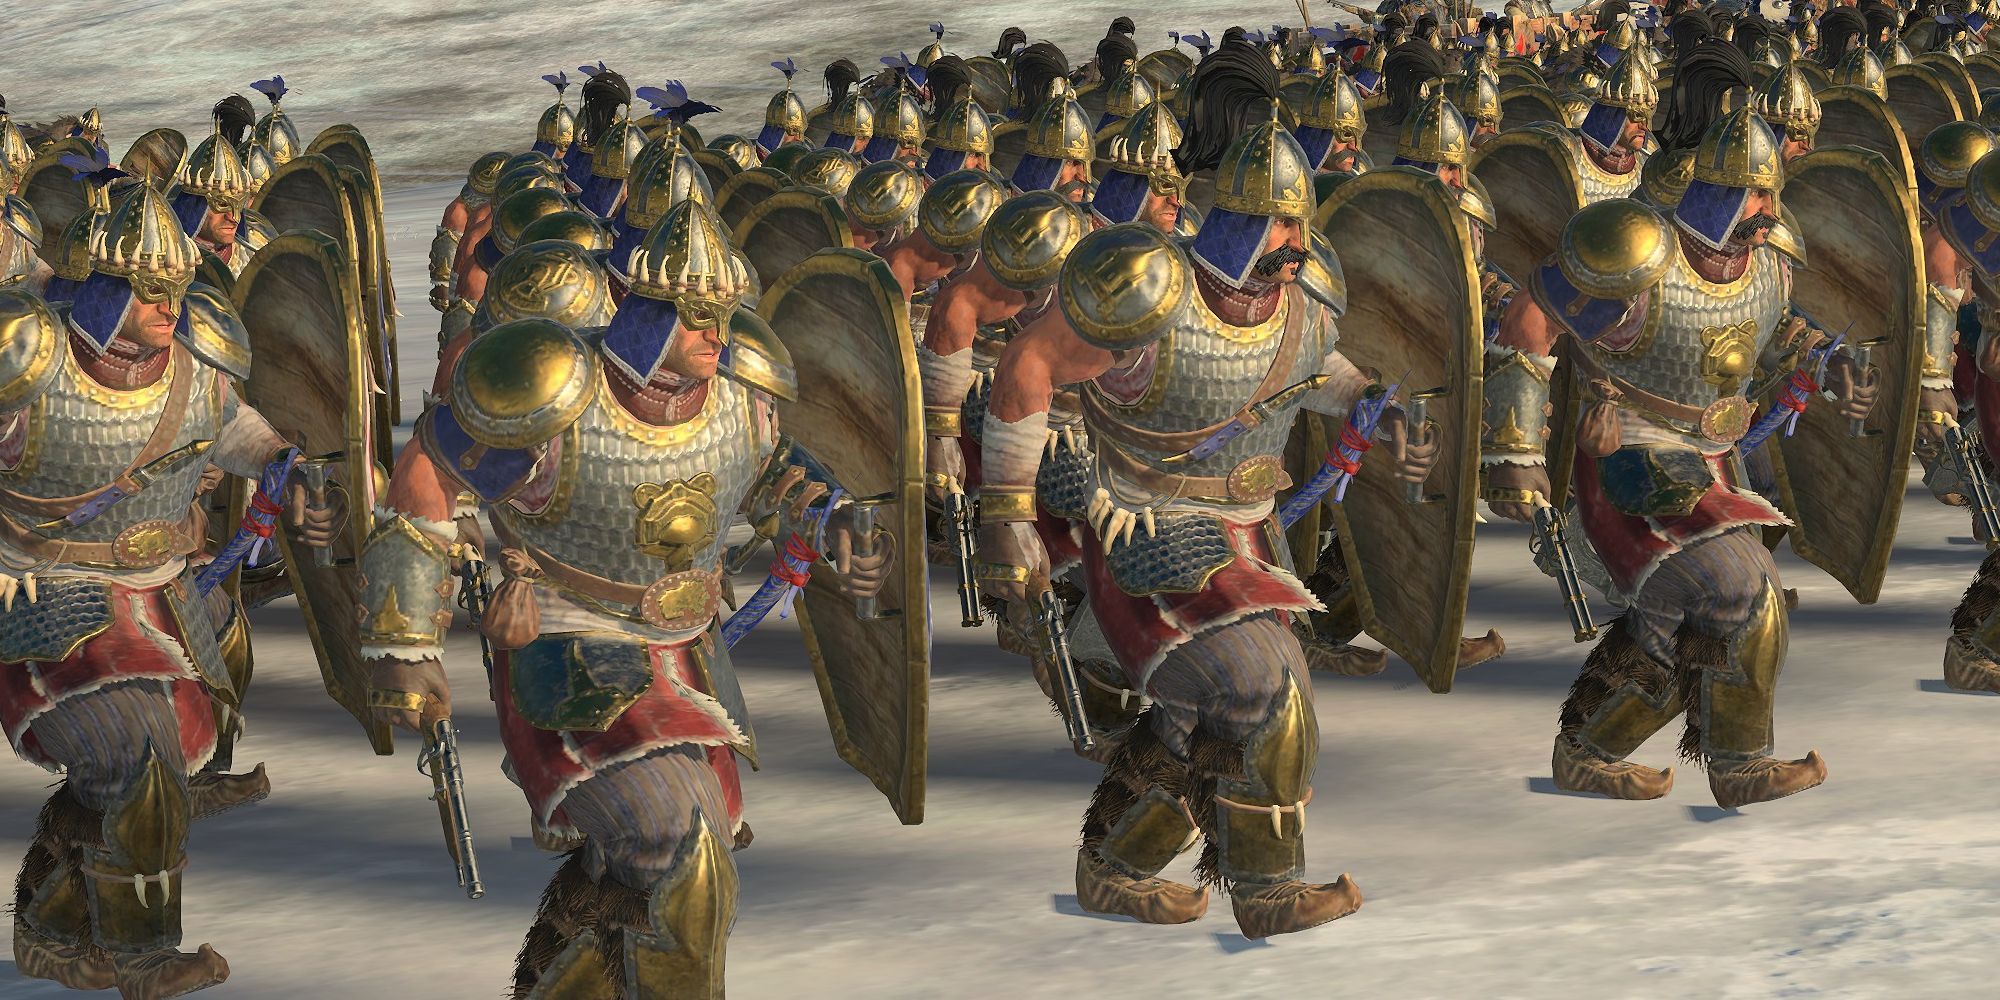 Armored Kossars marching towards the enemy